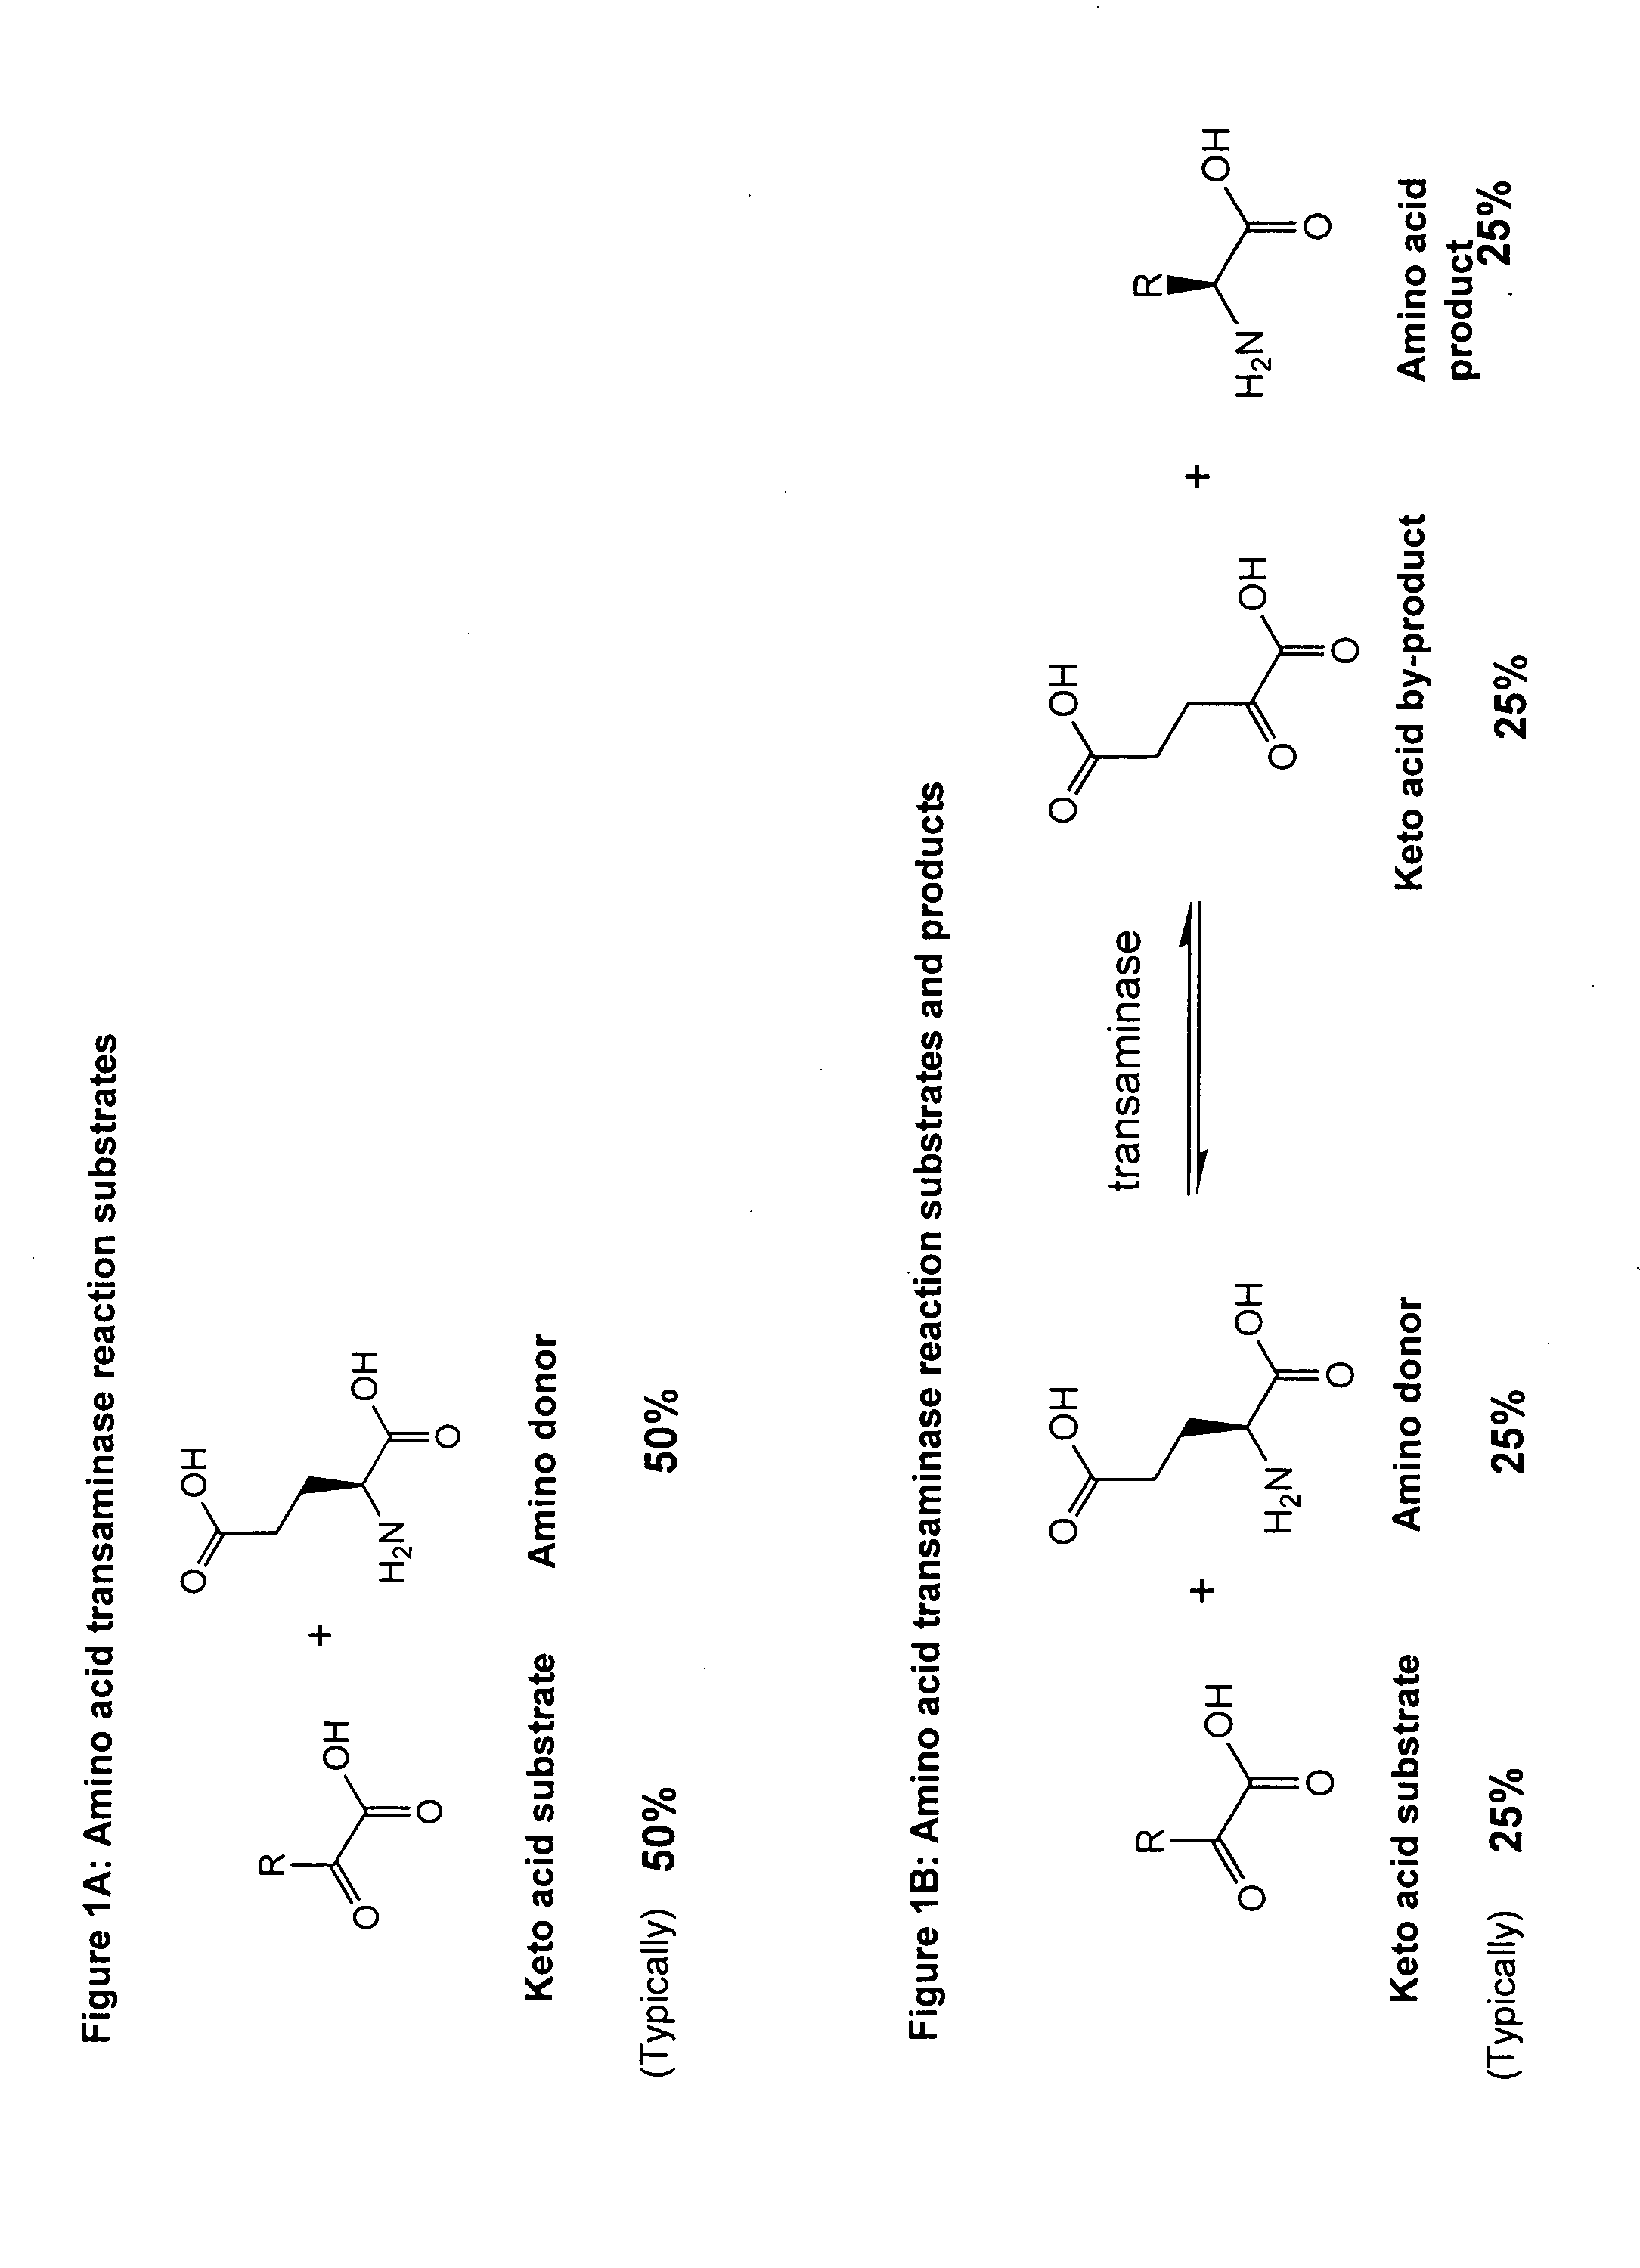 Method to increase the yield and improve purification of products from transaminase reactions